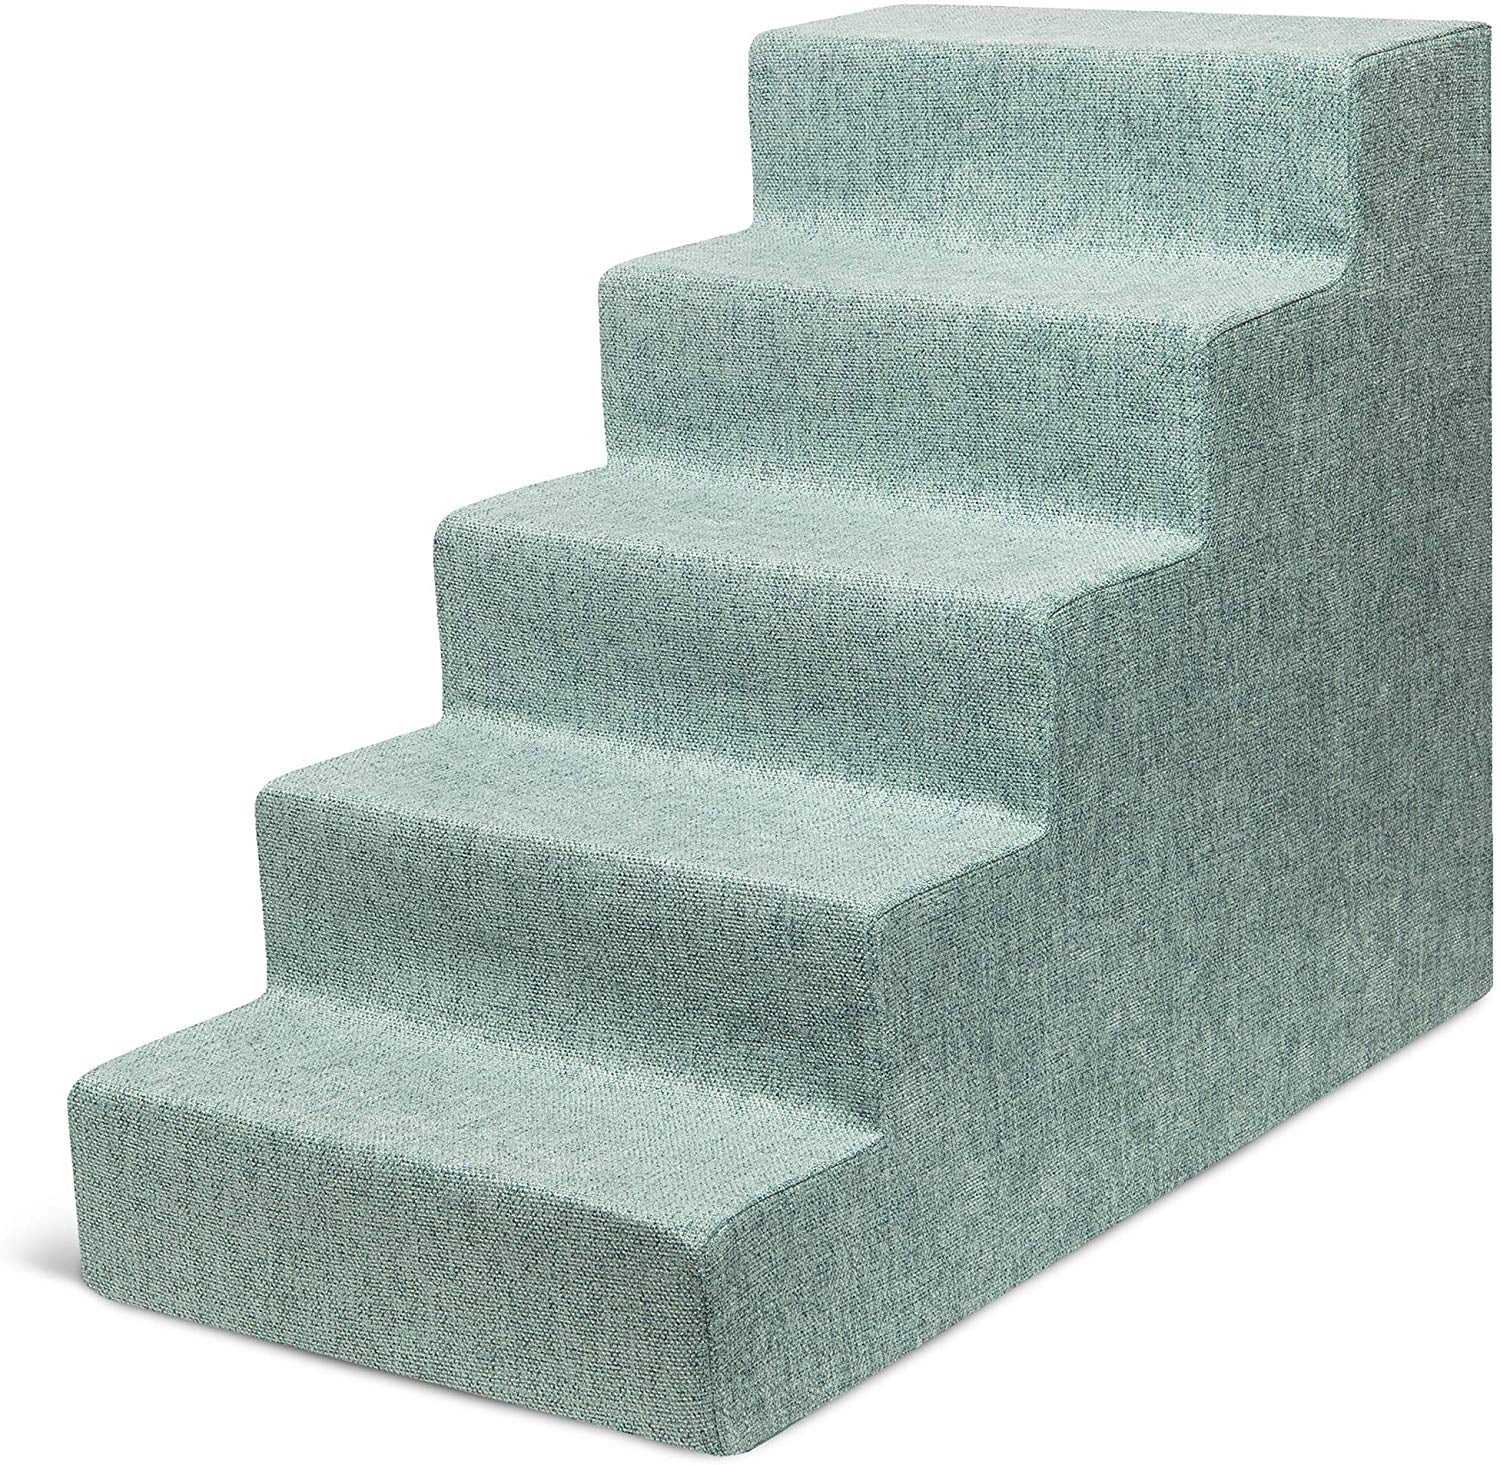 Made in USA Pet Steps/Stairs with CertiPUR-US Certified Foam for Dogs & Cats by Best Pet Supplies 